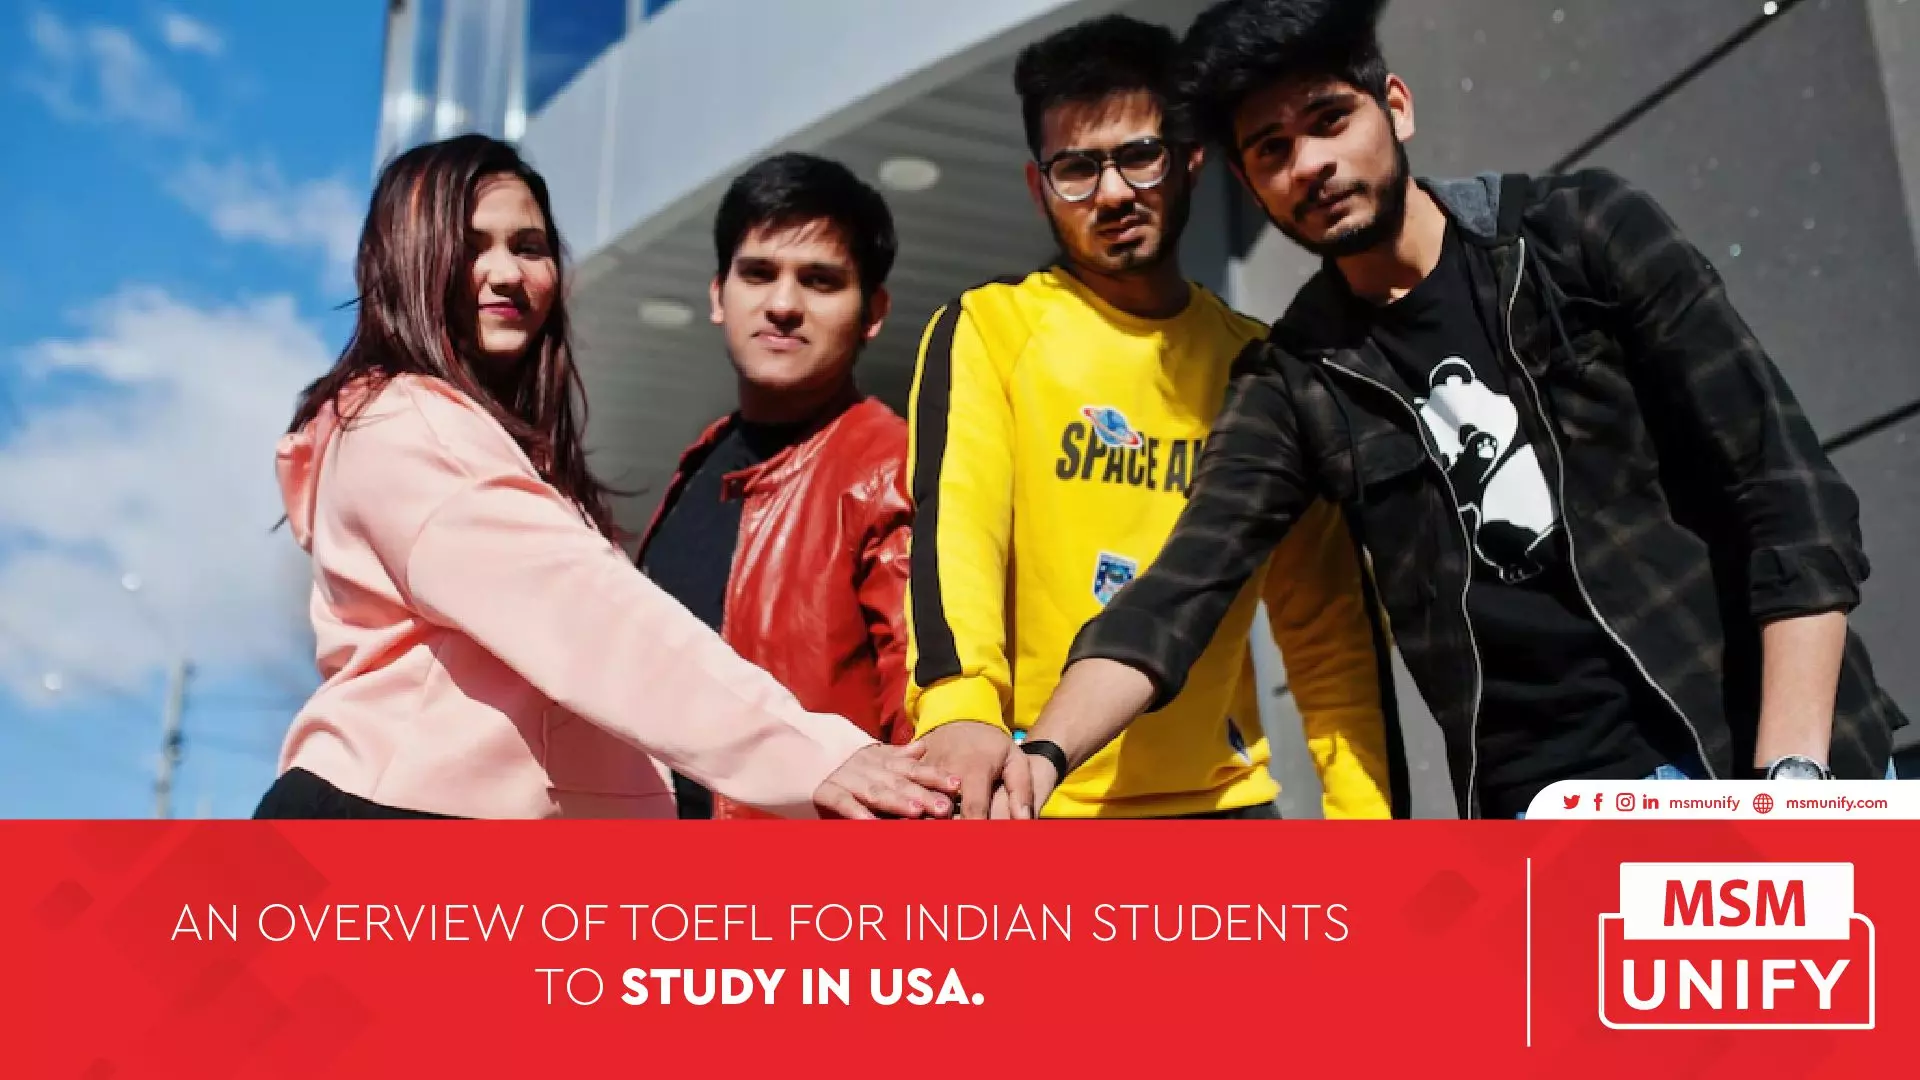 010423 MSM Unify An overview of TOEFL for Indian Students to Study in USA 01